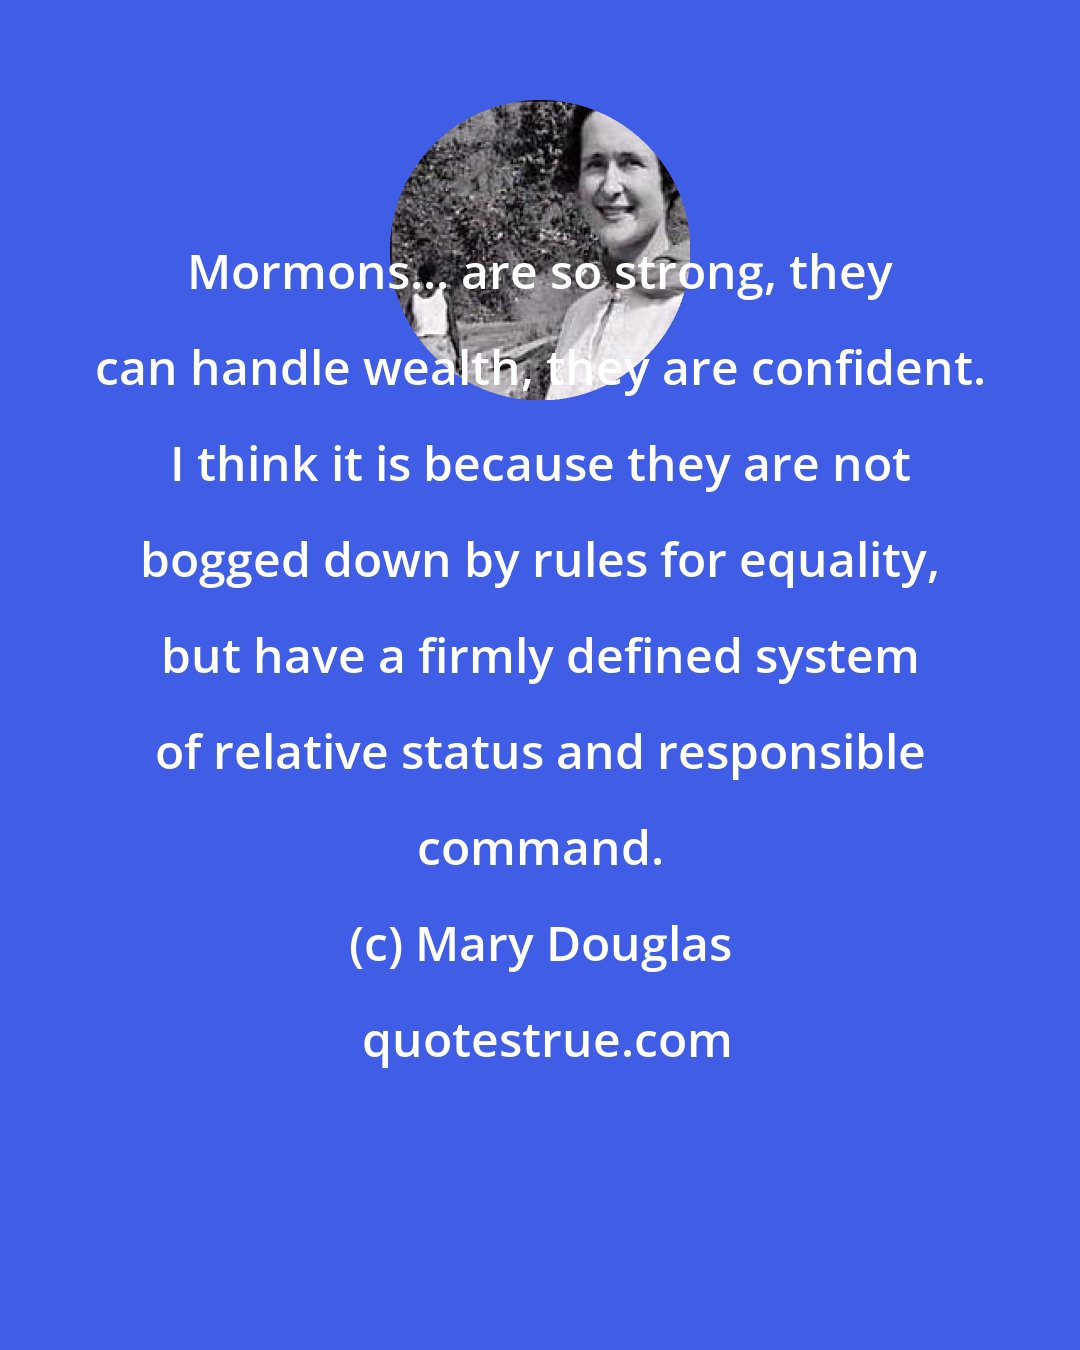 Mary Douglas: Mormons... are so strong, they can handle wealth, they are confident. I think it is because they are not bogged down by rules for equality, but have a firmly defined system of relative status and responsible command.